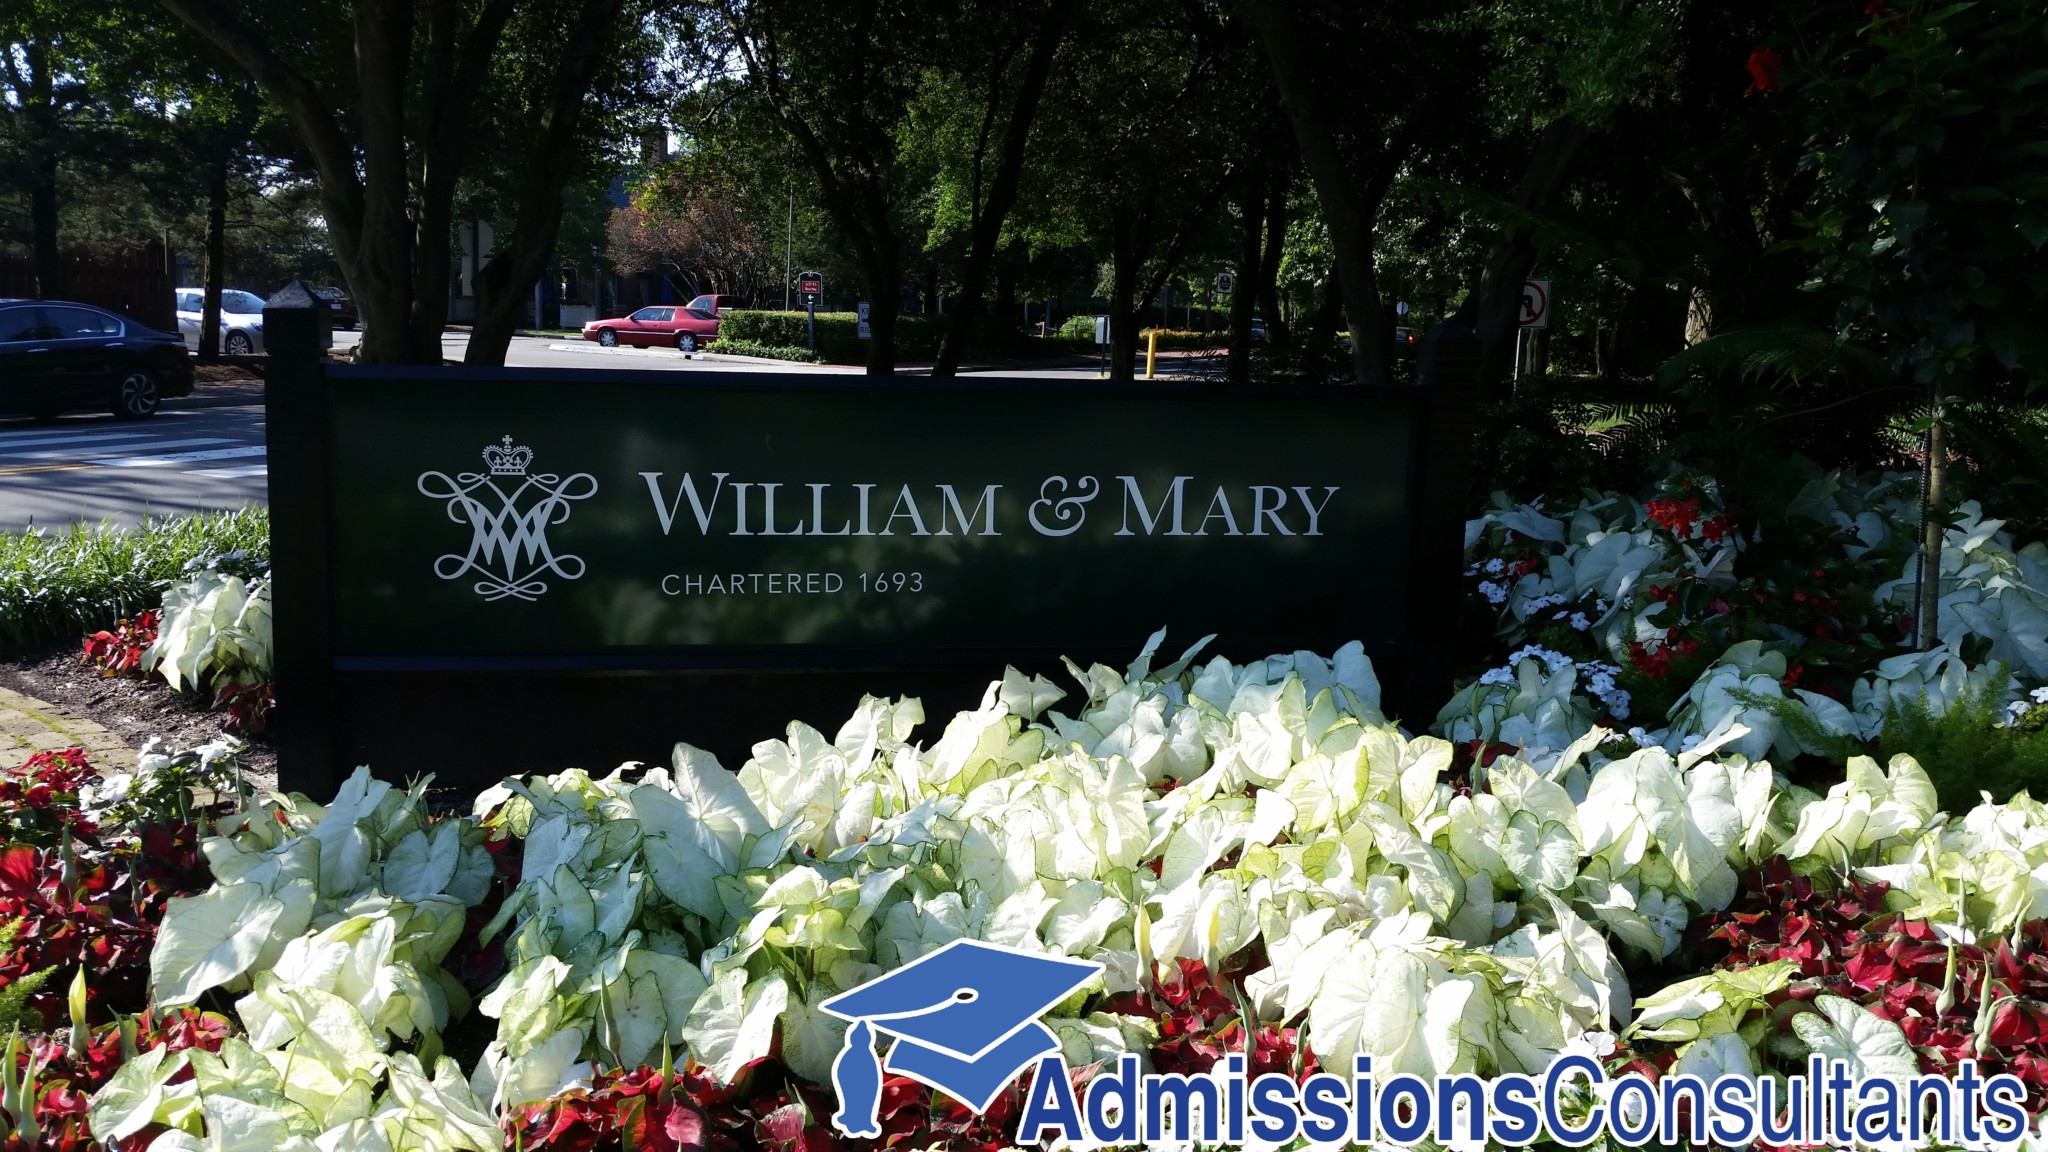 William & Mary Admissions Profile, Graphs and Analysis